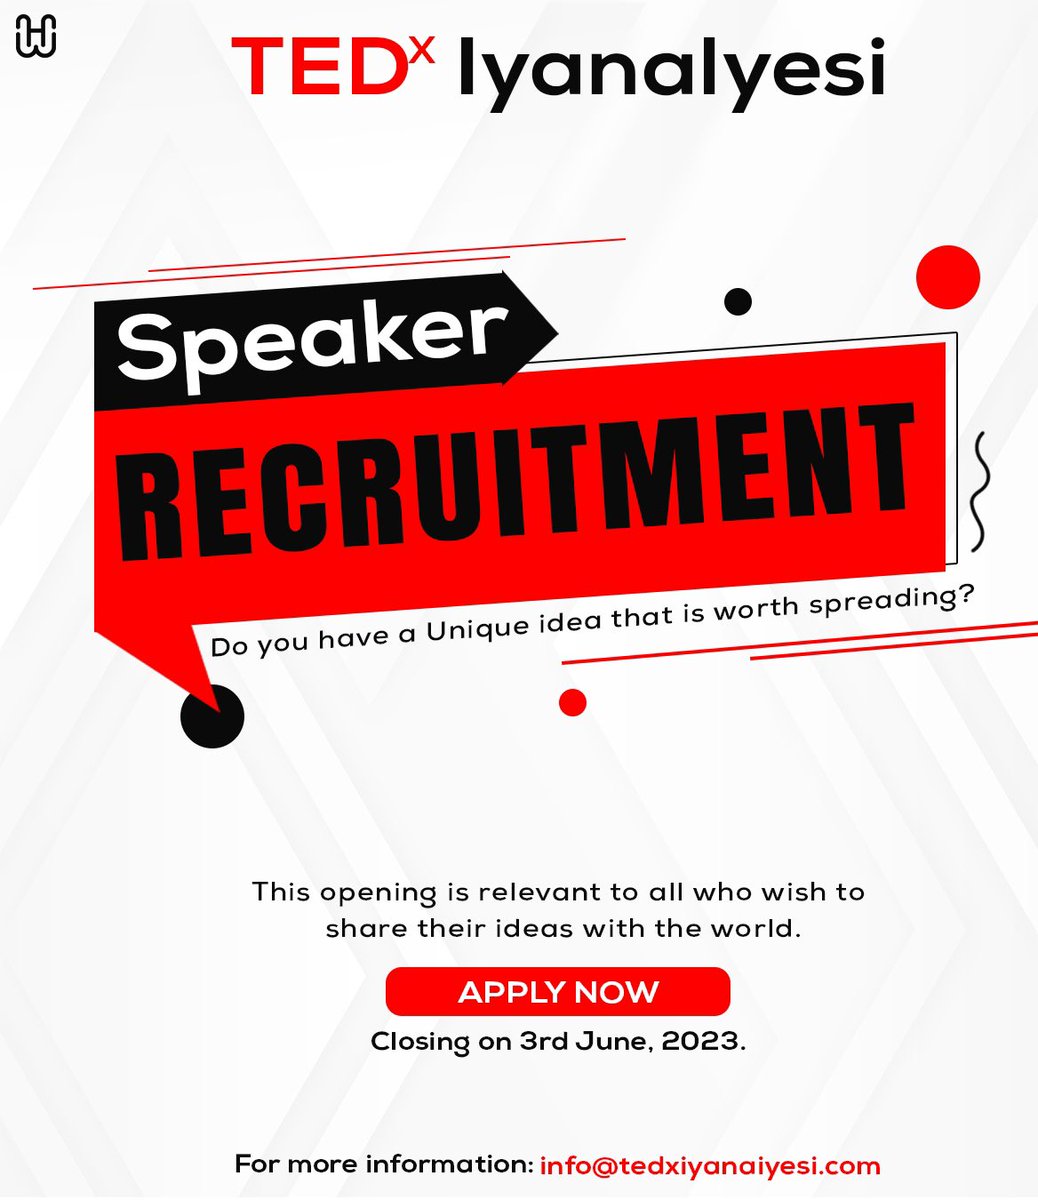 It’s exactly one week to the close of applications📍

Do you have a unique idea you wish to share or know someone who does?

Apply to be a #tedxspeaker at #tedxiyanaiyesi today!

Apply here: bit.ly/Speakers_TEDxI…

#tedx #tedxtalks #tedxspeaker #tedxiyanaiyesi